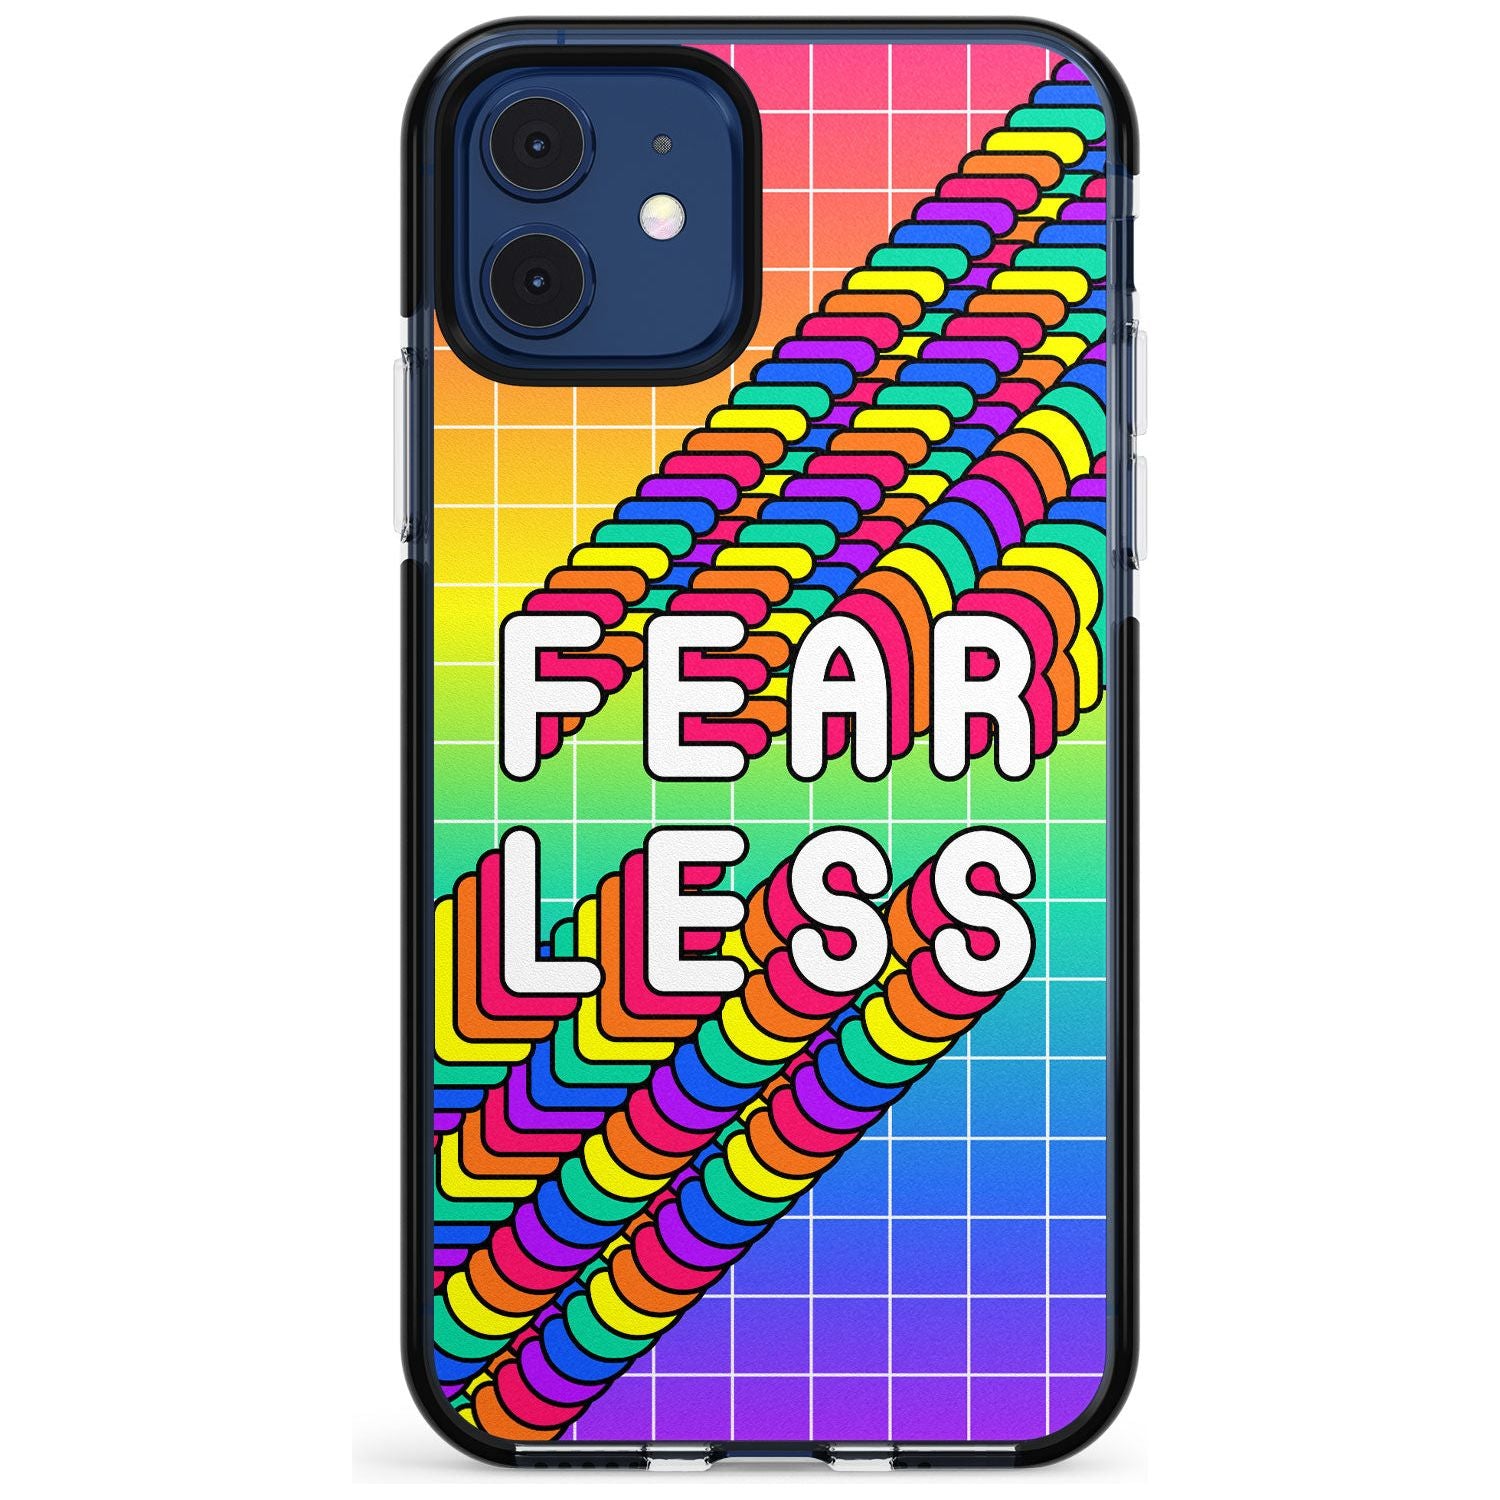 Fearless Black Impact Phone Case for iPhone 11 Pro Max